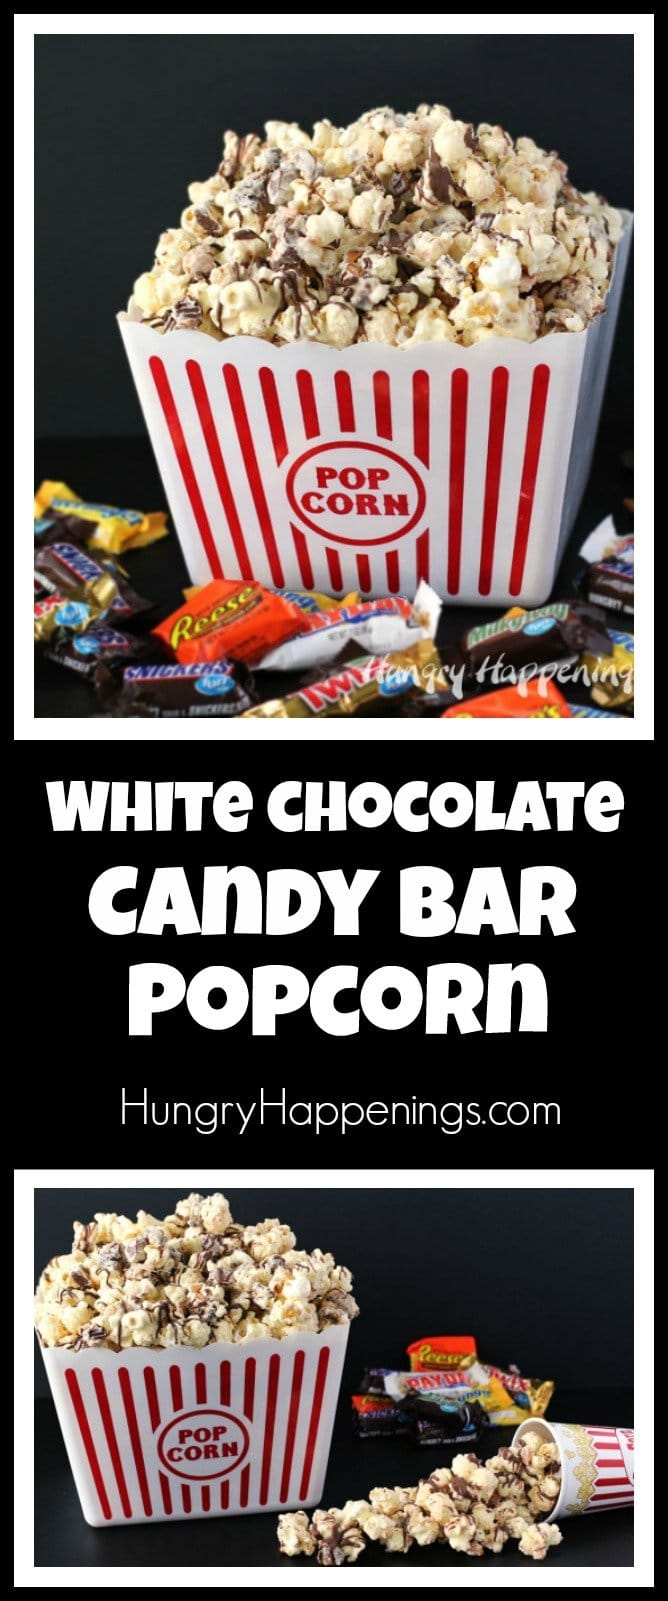 Use all that left over Halloween candy to make some amazing White Chocolate Candy Bar Popcorn. You can package it up and give it as Christmas gifts or enjoy it as a movie night snack. 